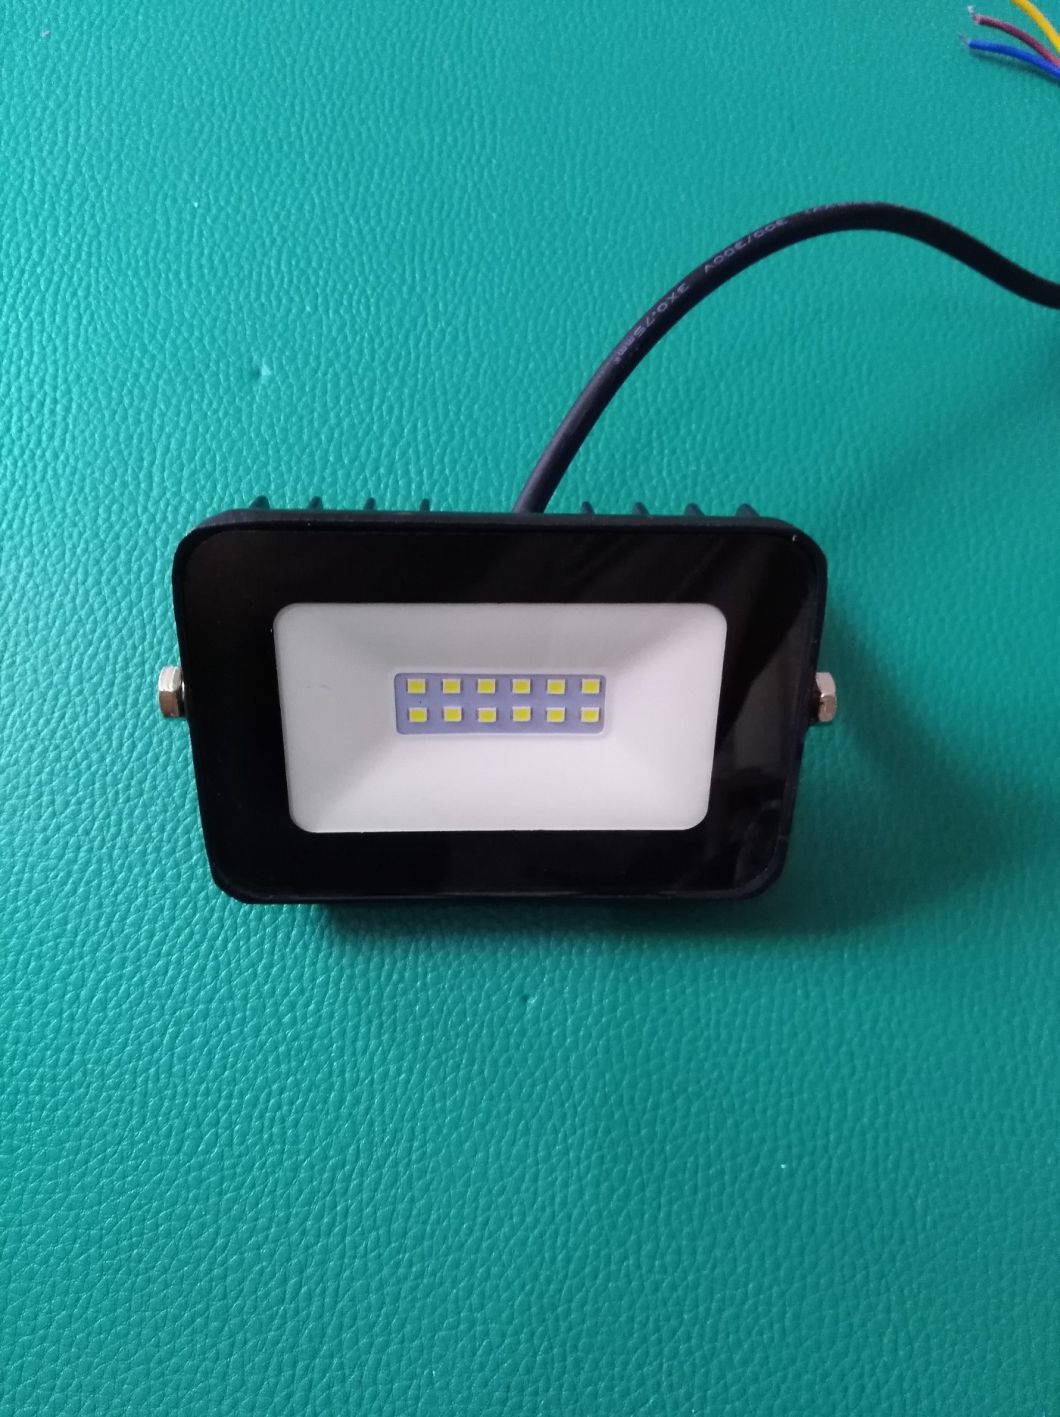 Ultra-Thin No Driver Linear Type SMD LED Flood Light with Good Price